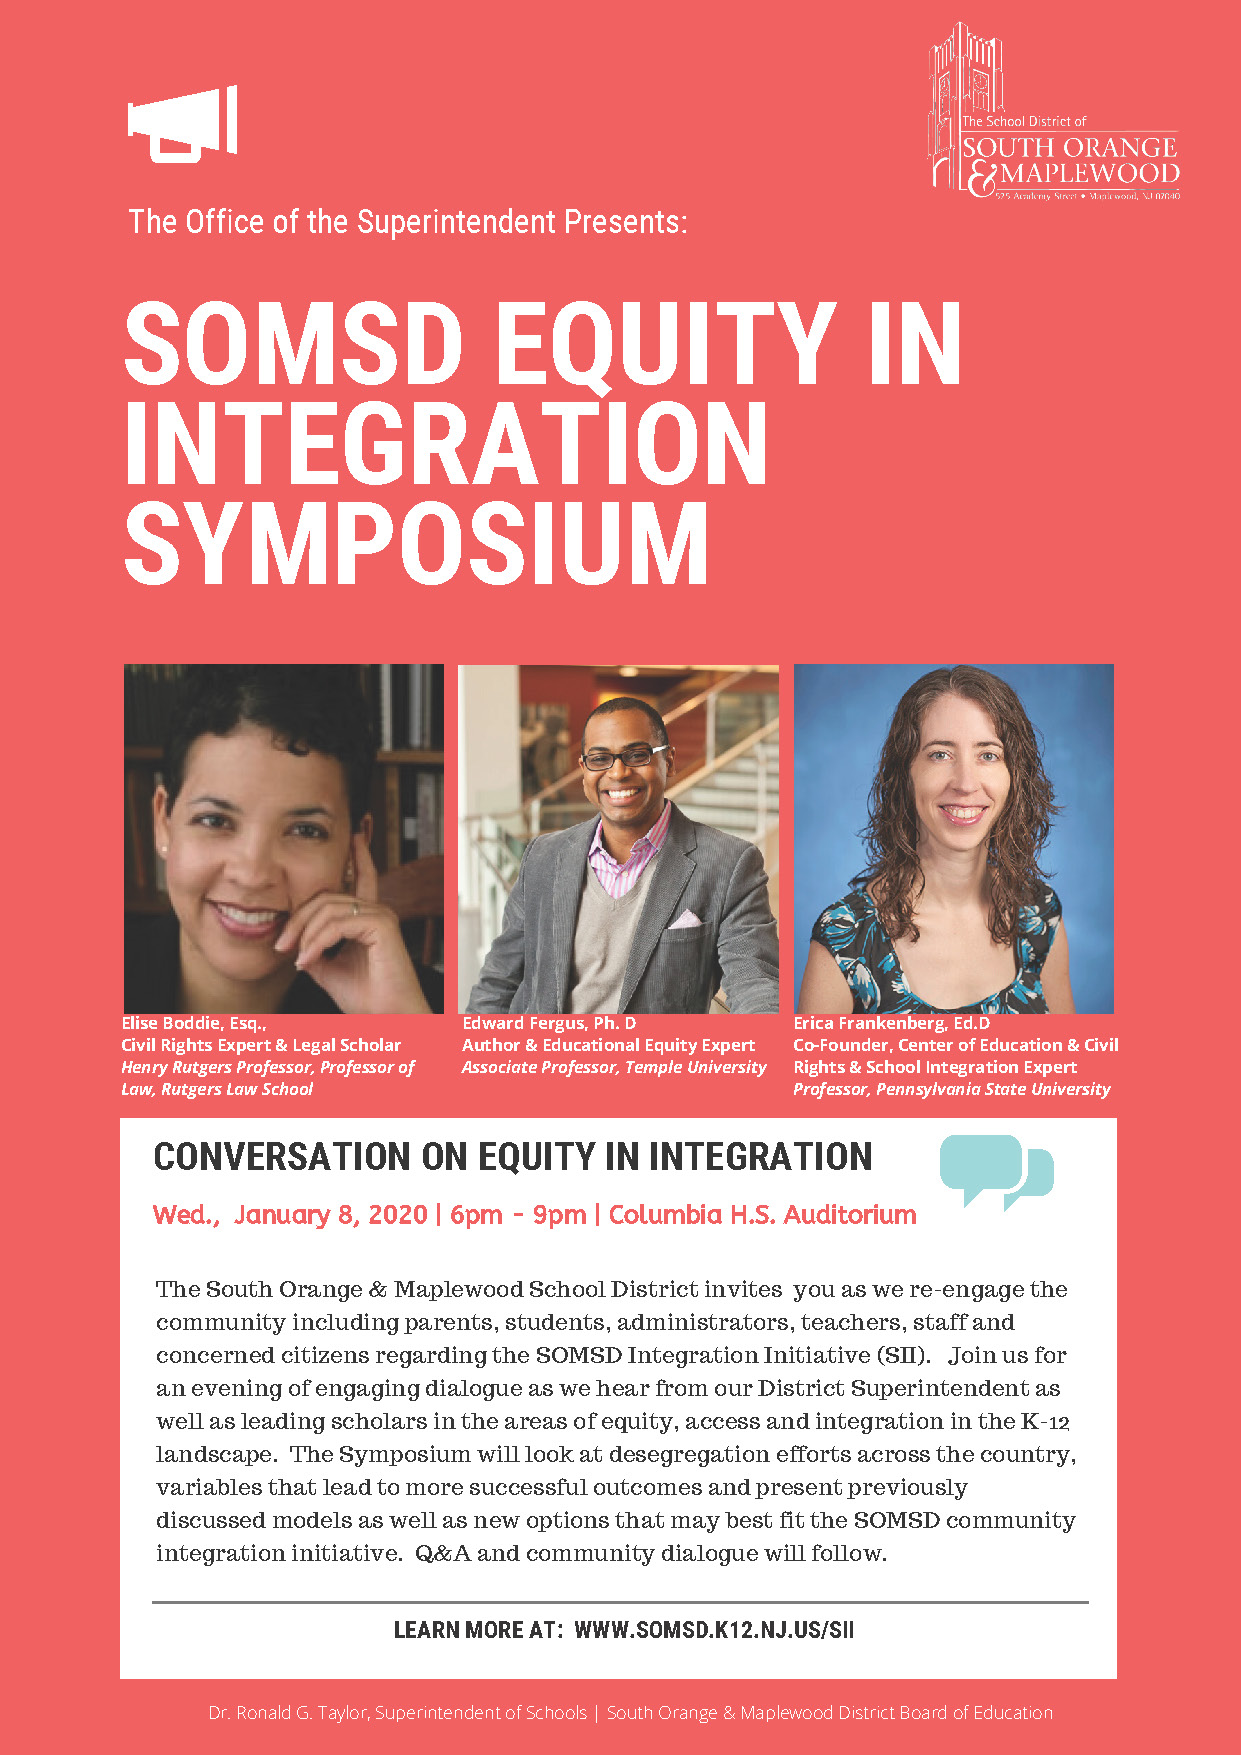 SOMSD Equity In Integration Symposium